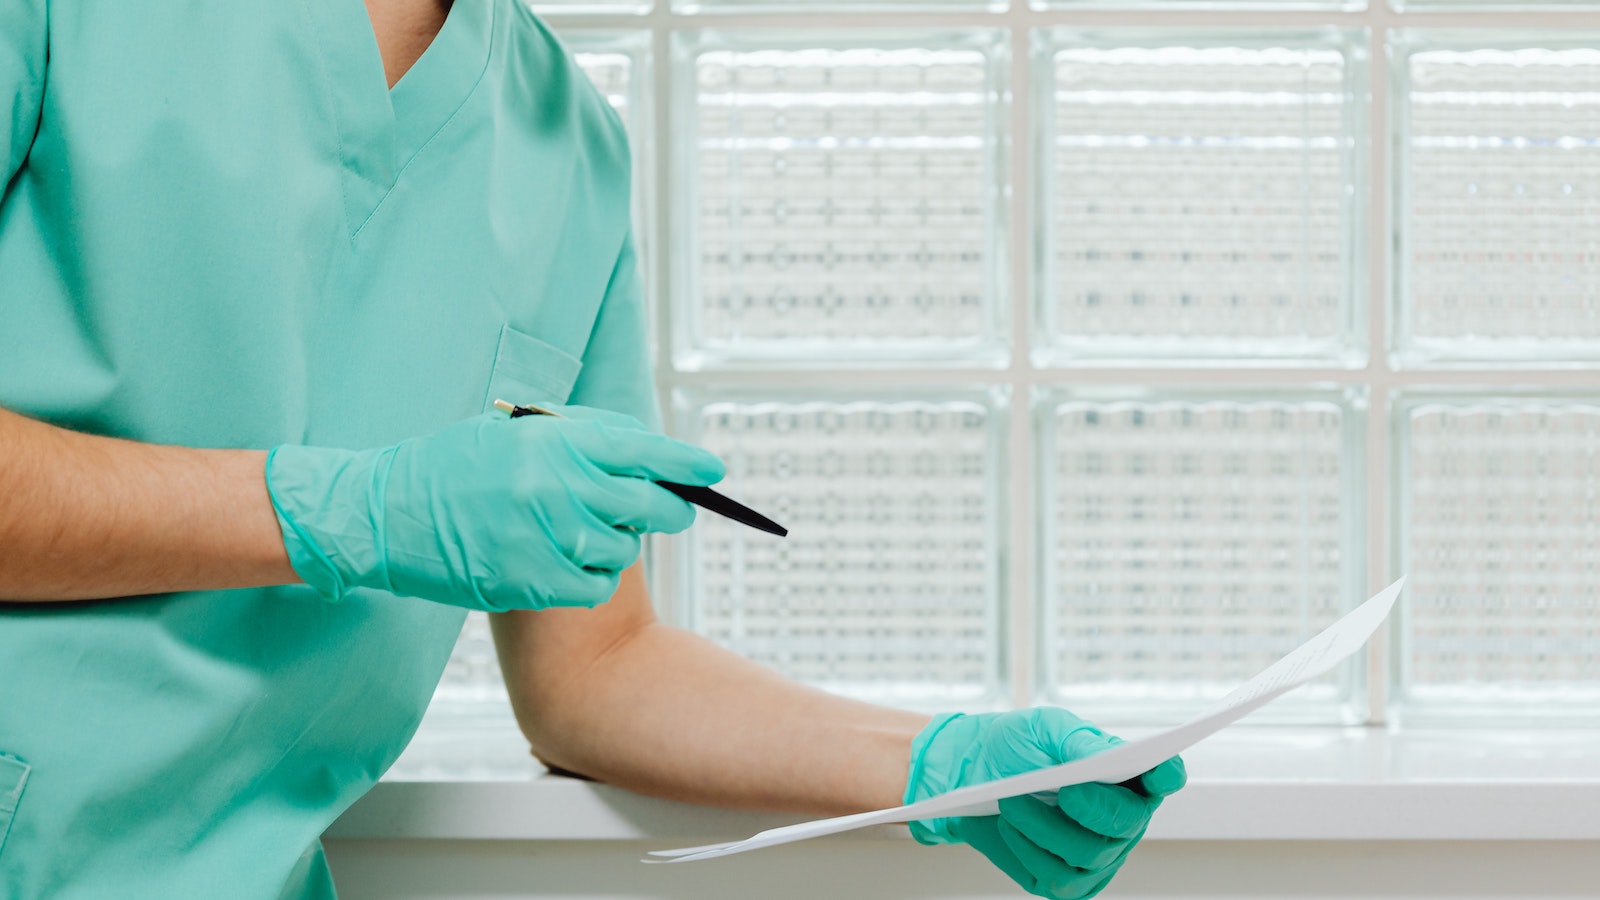 Person in gloves and hospital scrubs with a pen and paper